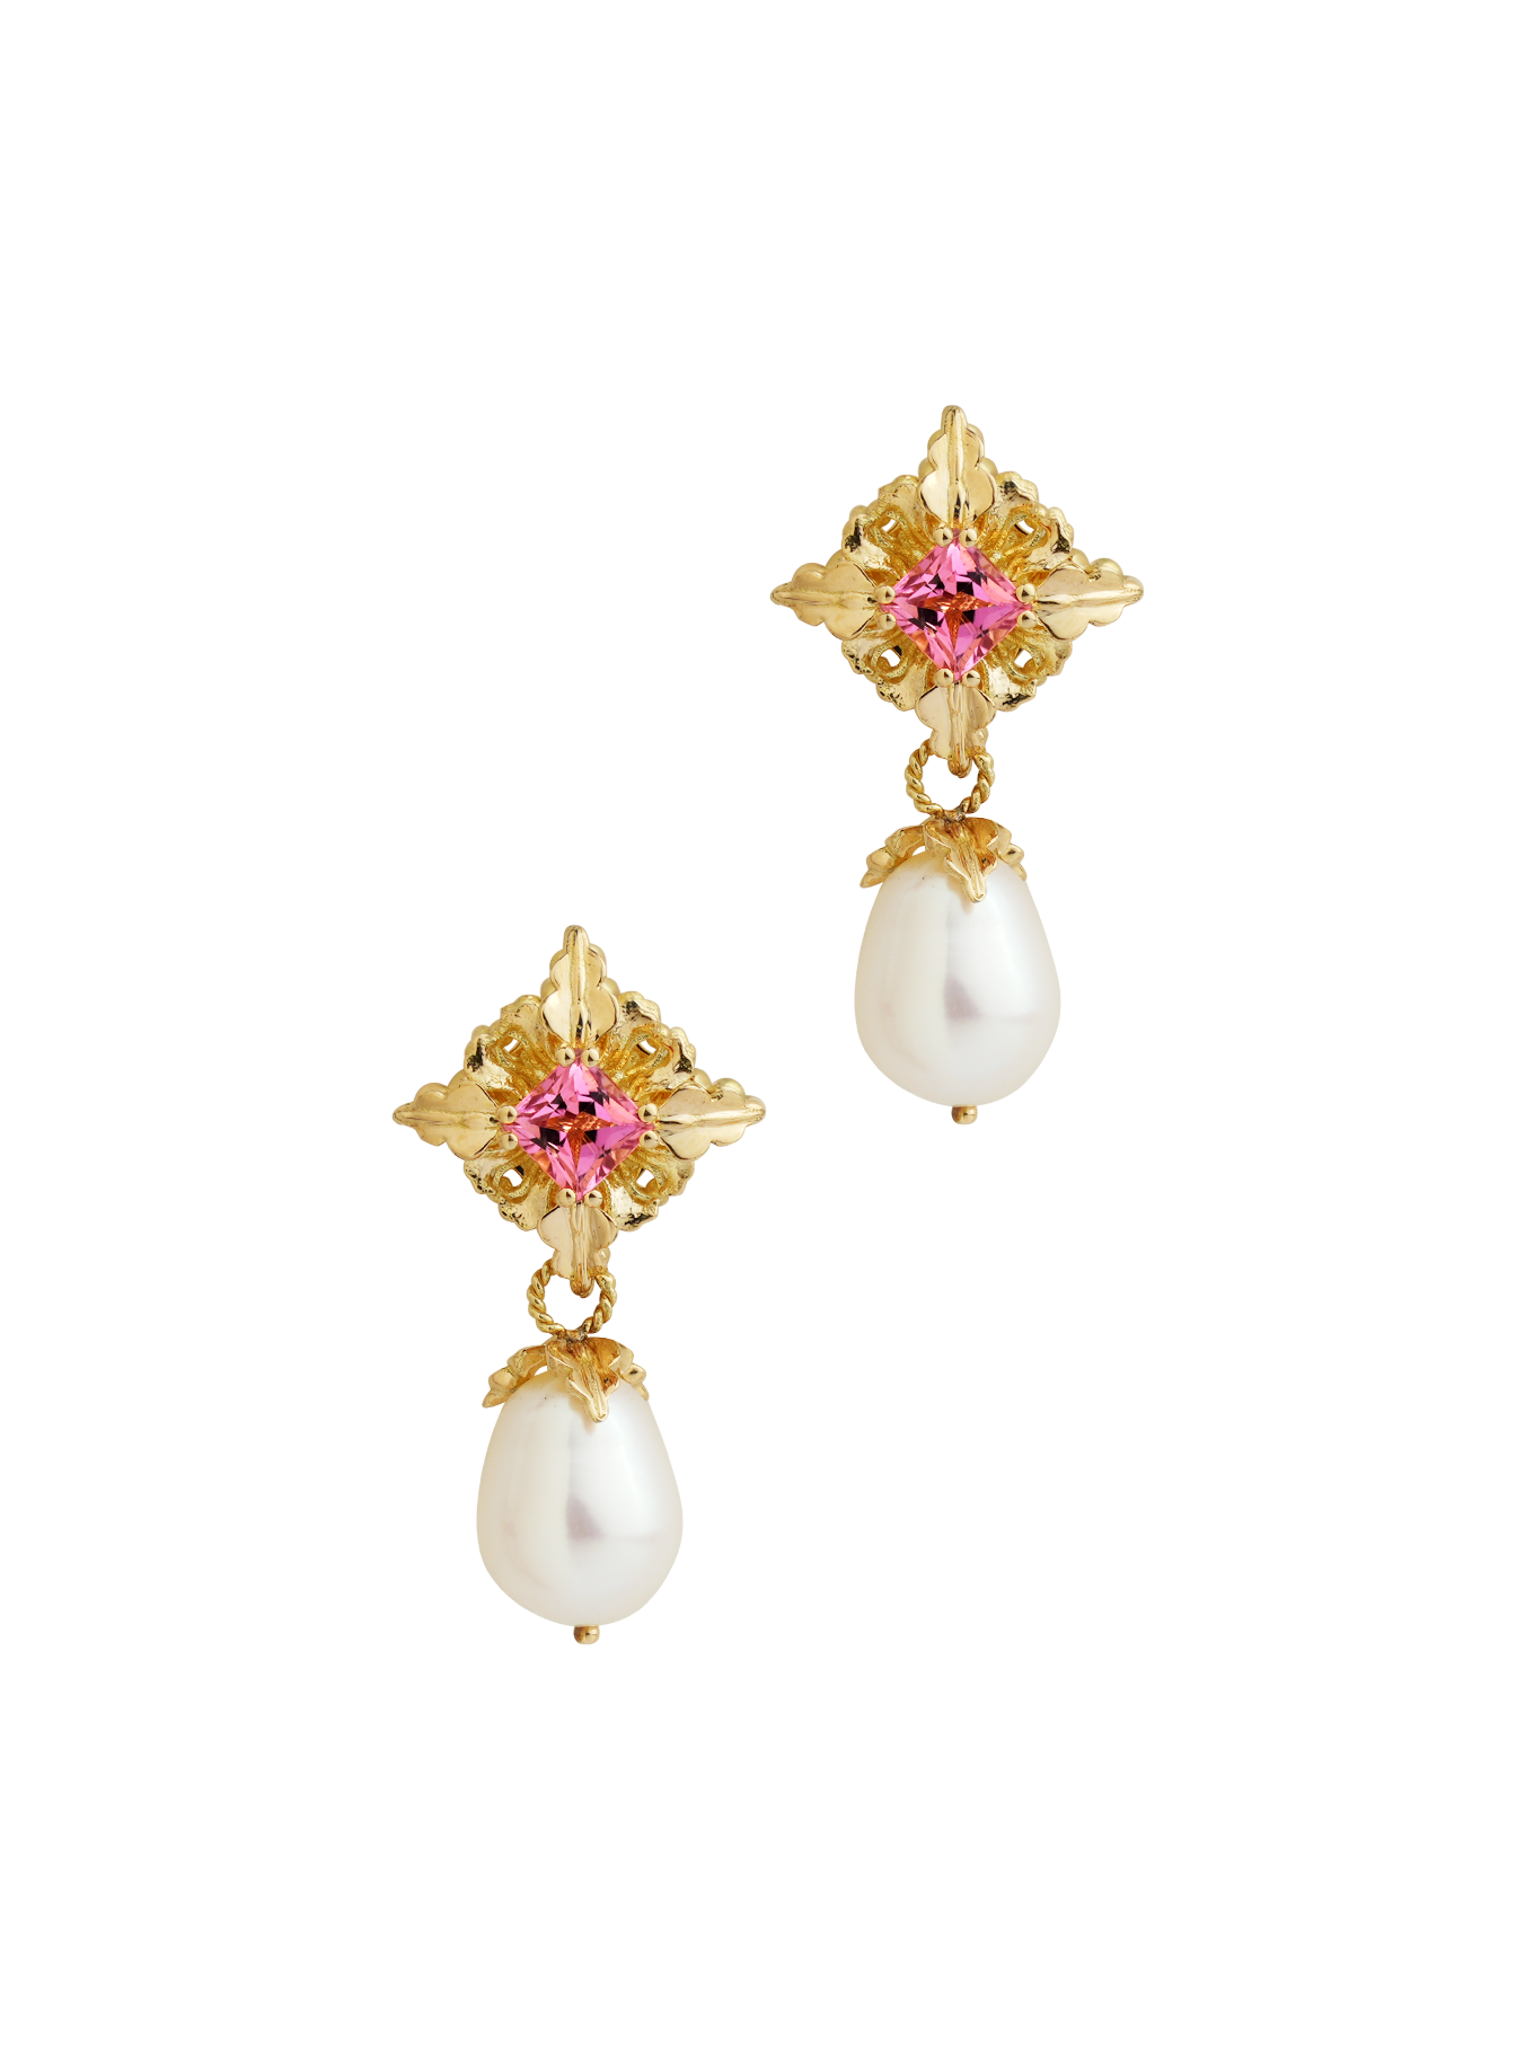 Majestica pearls and tourmaline earrings